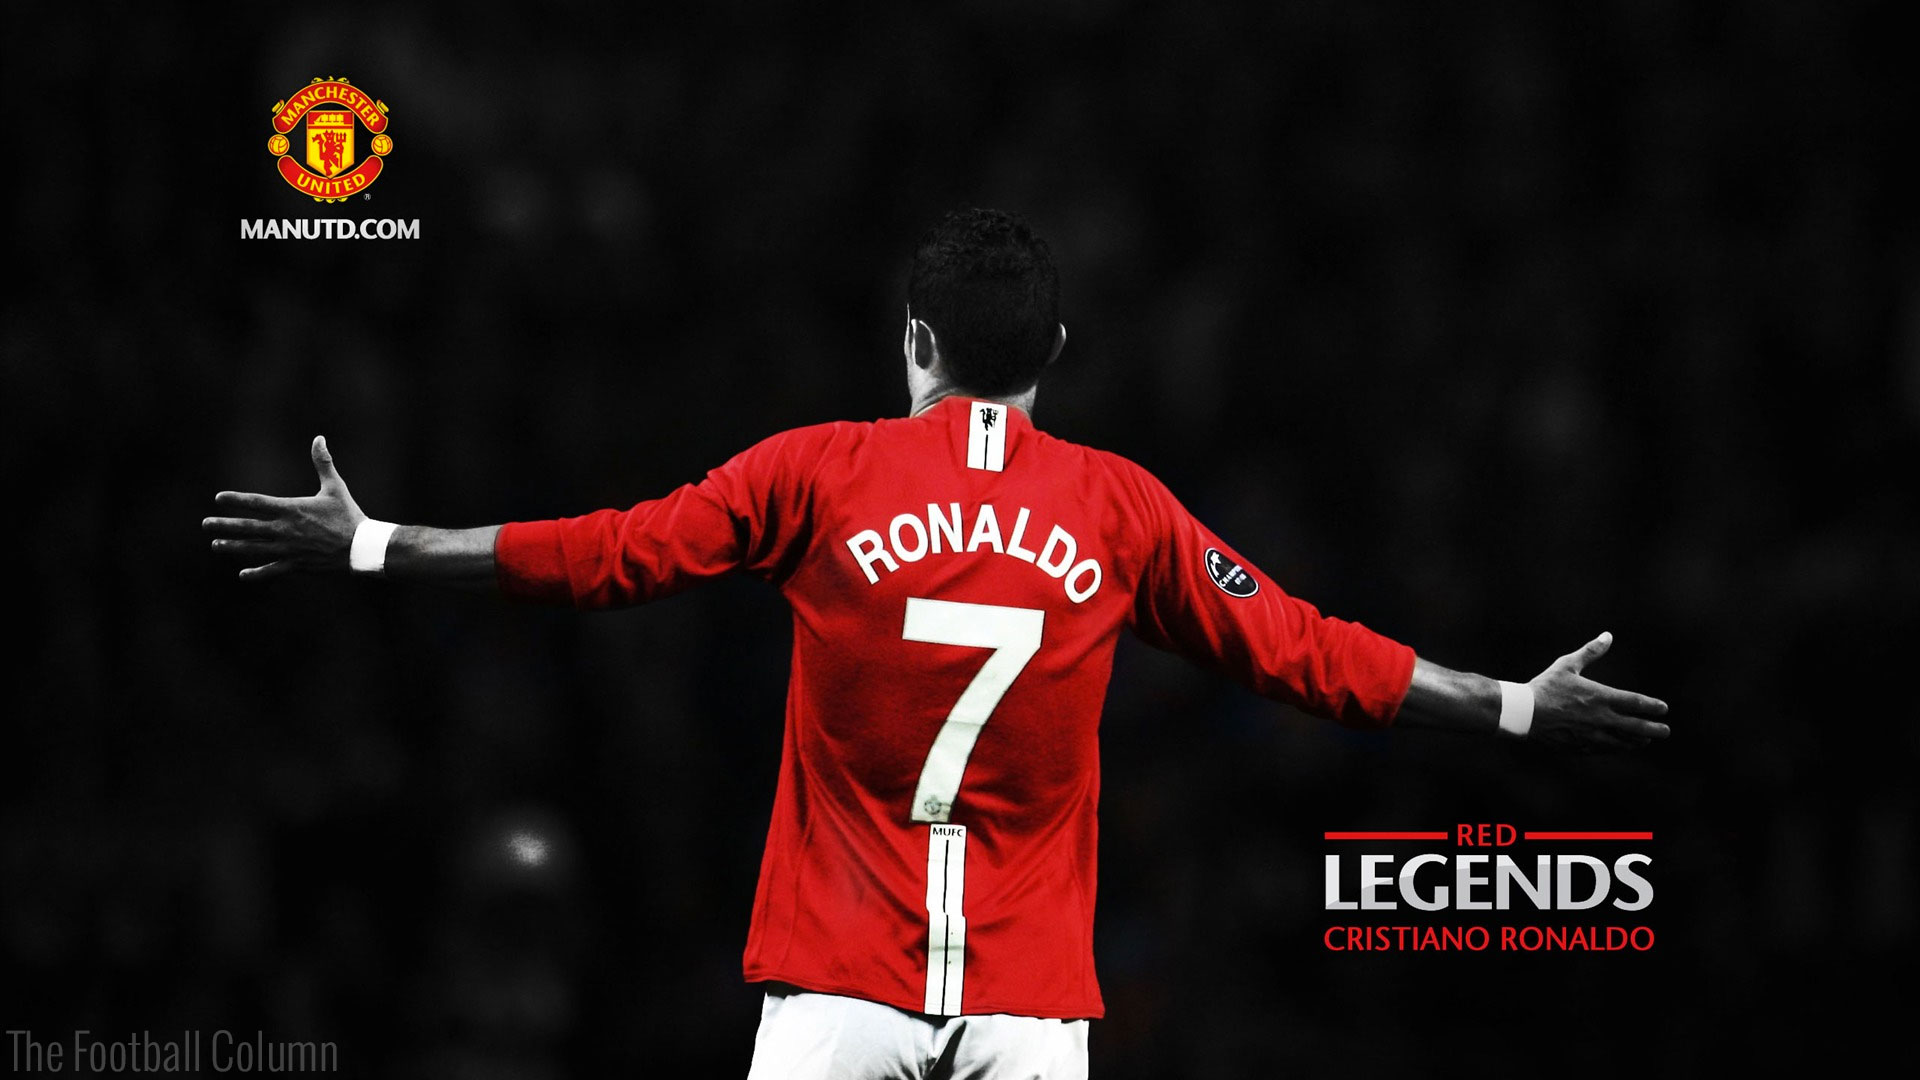 Manchester United Wallpaper | Pretty Wallpapers HD